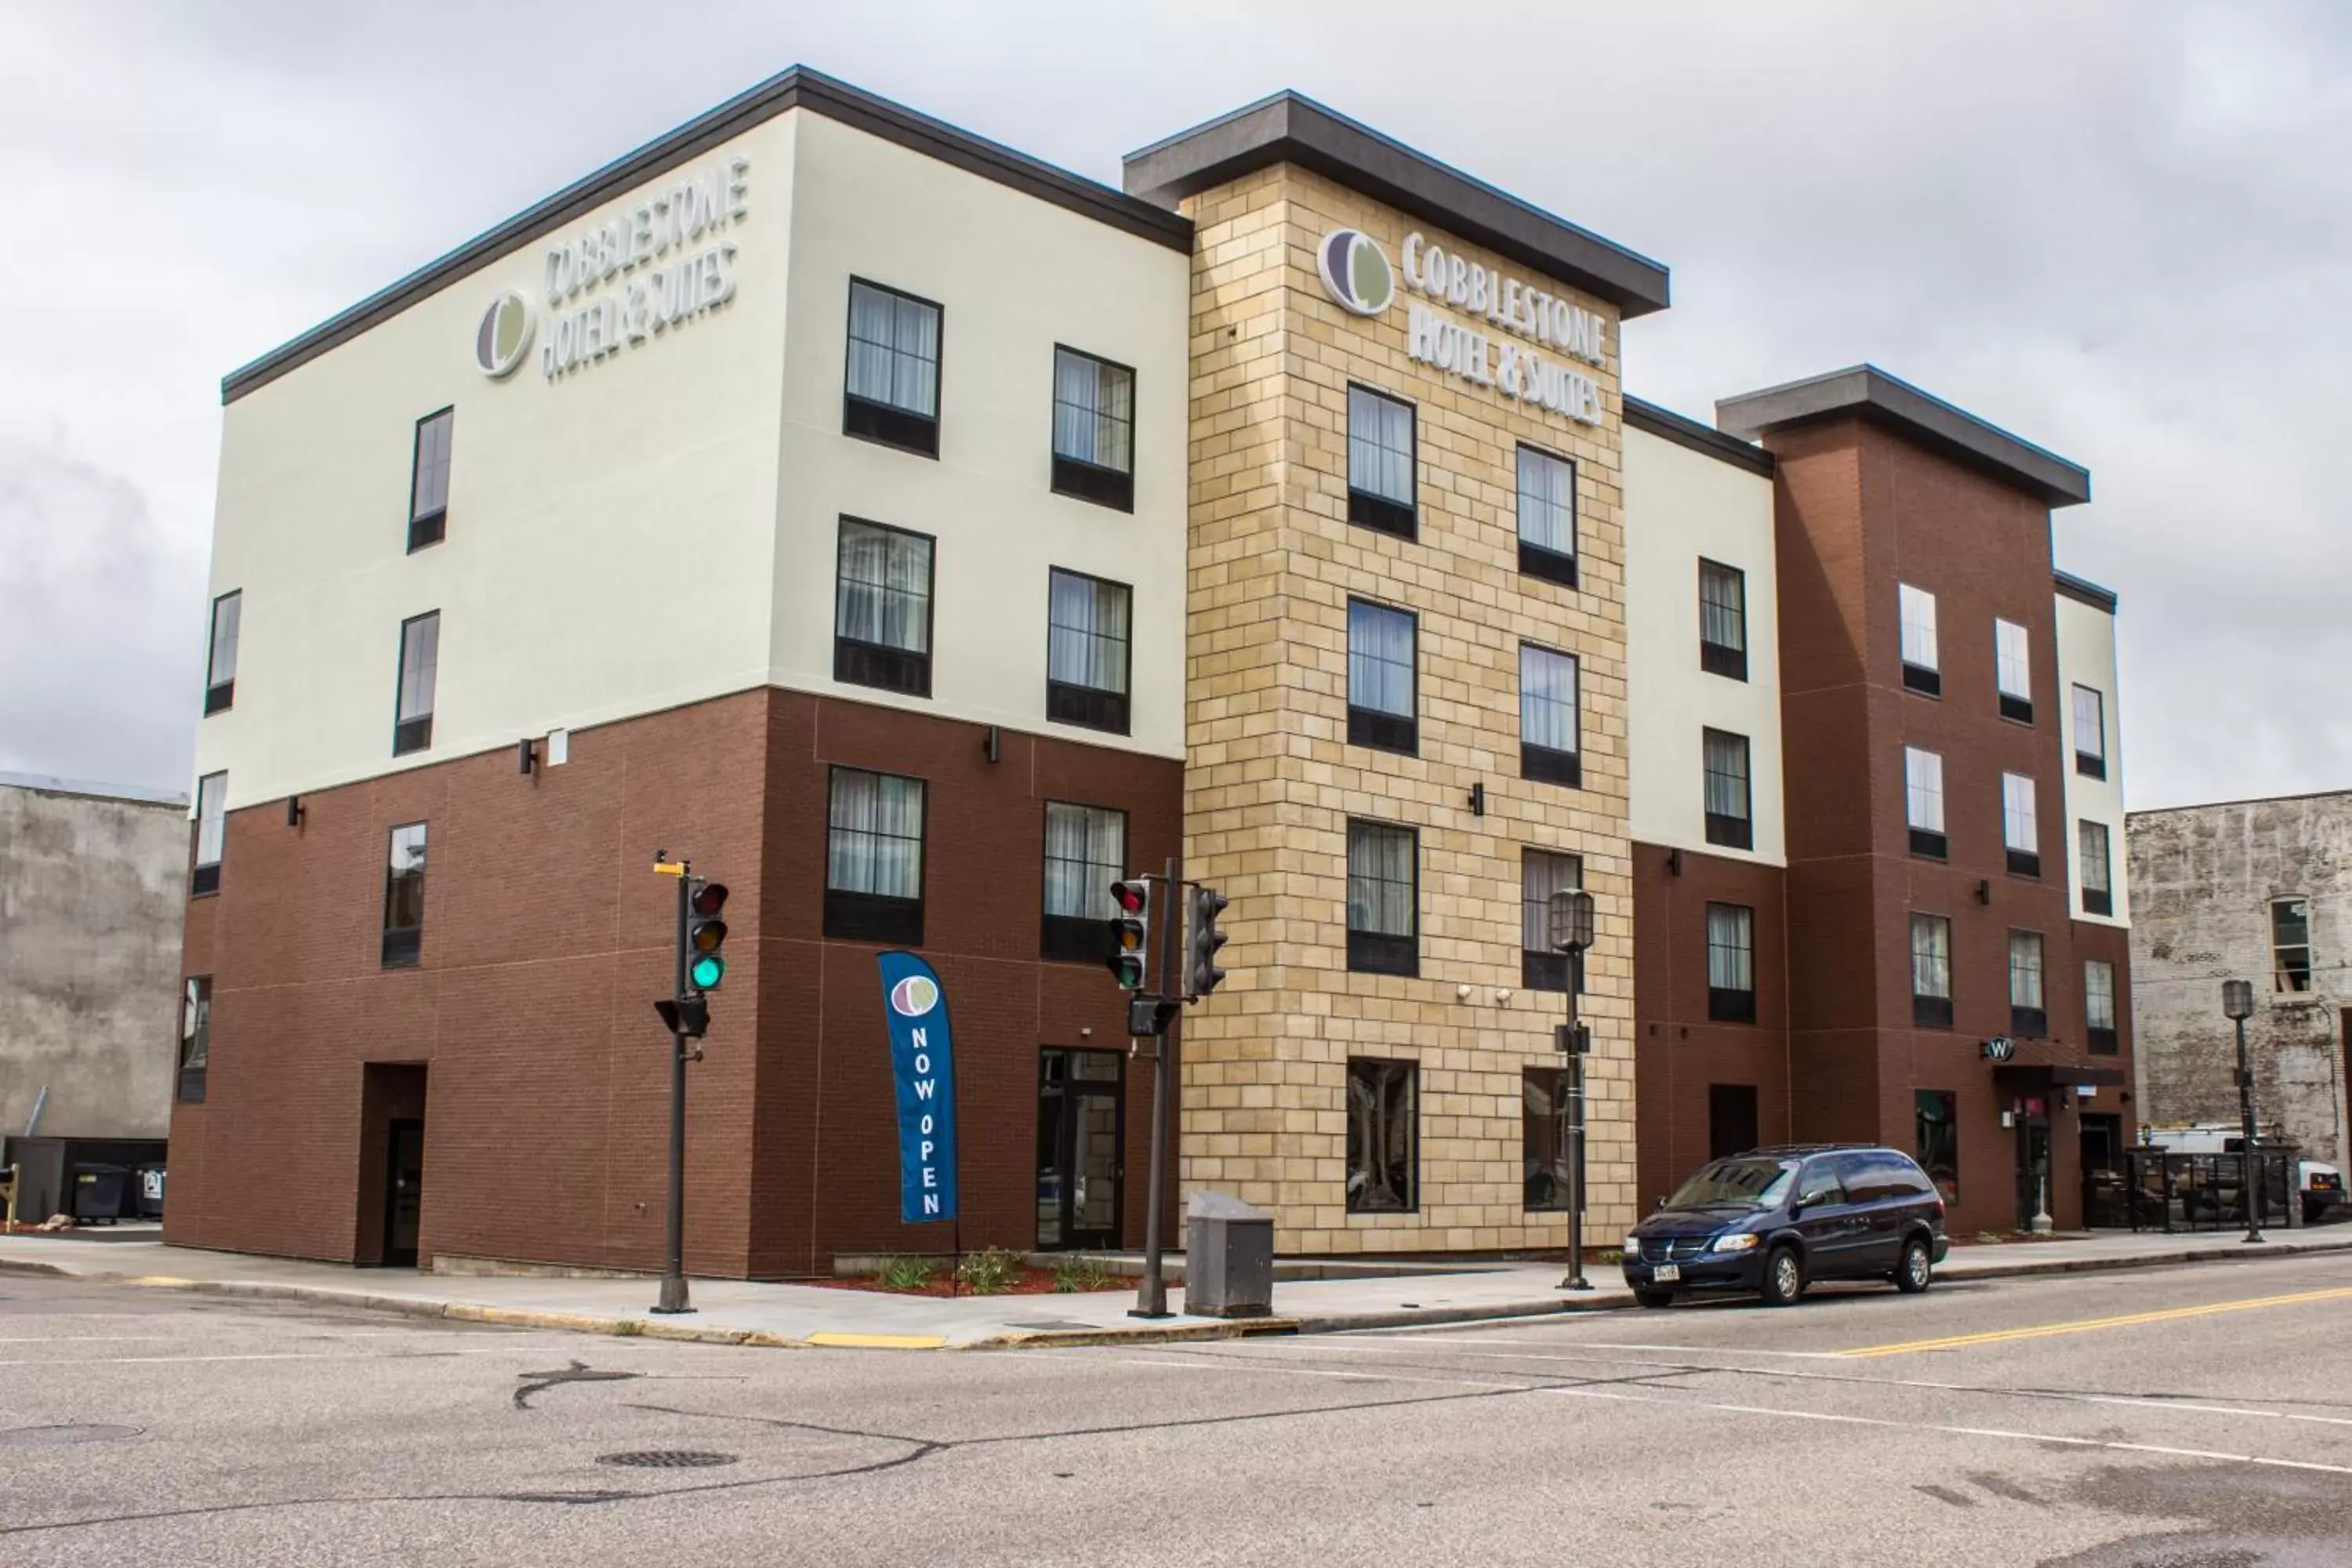 Property building in Cobblestone Hotel & Suites - Chippewa Falls